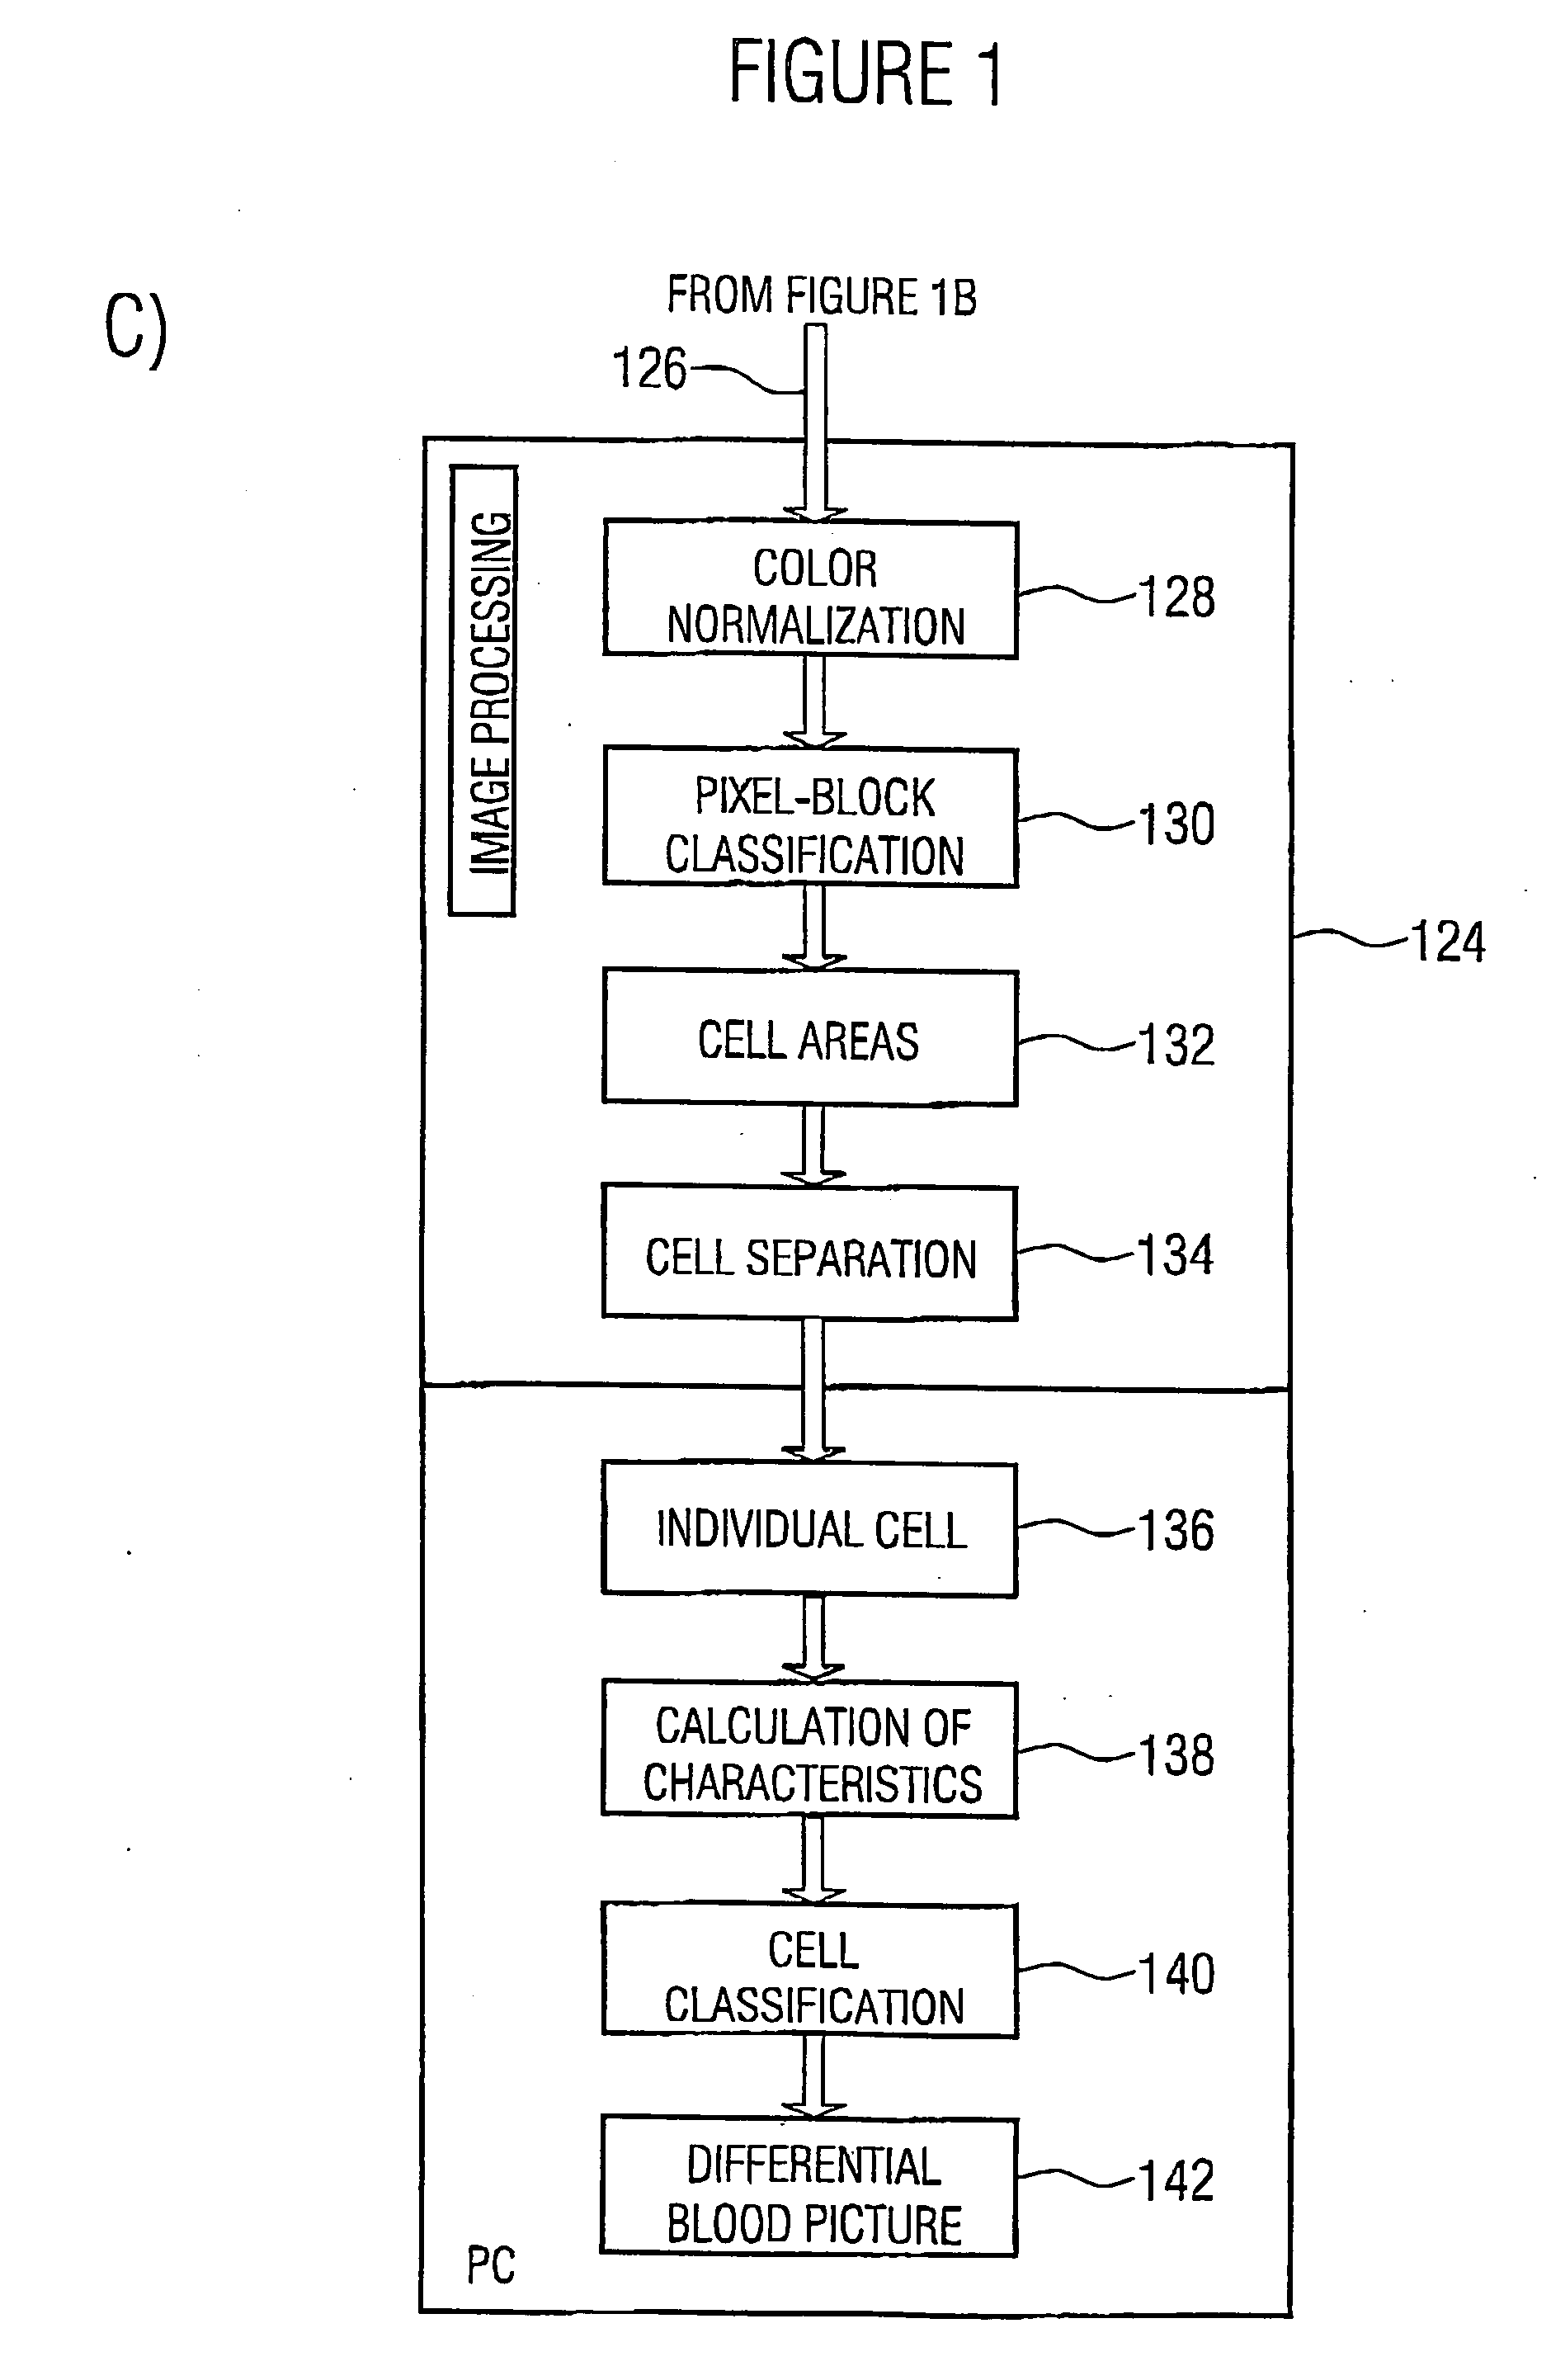 Method and apparatus for detecting various cell types of cells in a biological sample